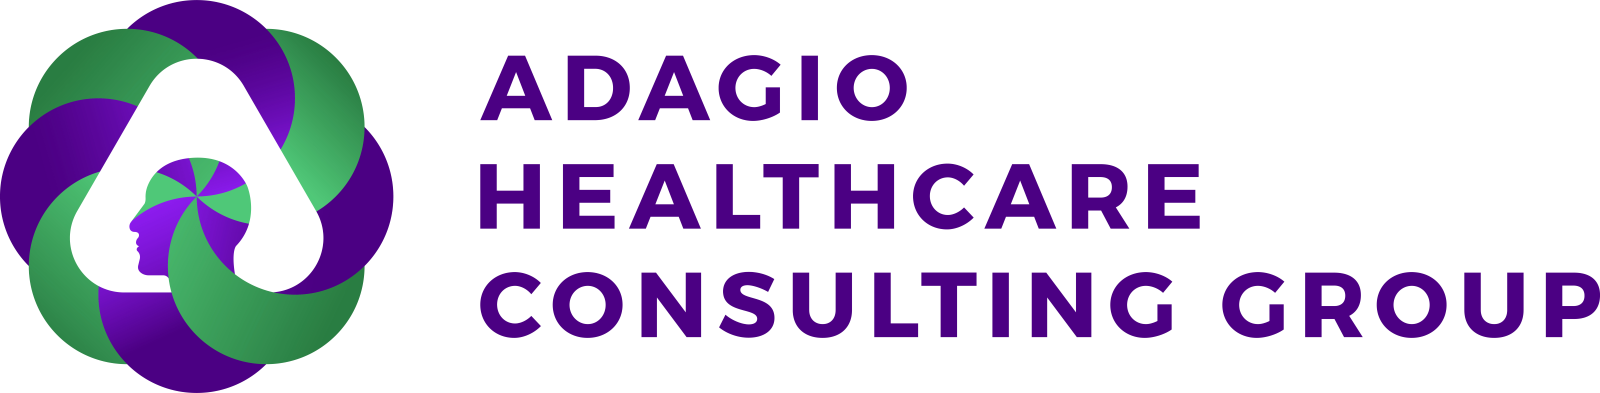 Adagio Healthcare Consulting Group, Monday, October 3, 2022, Press release picture